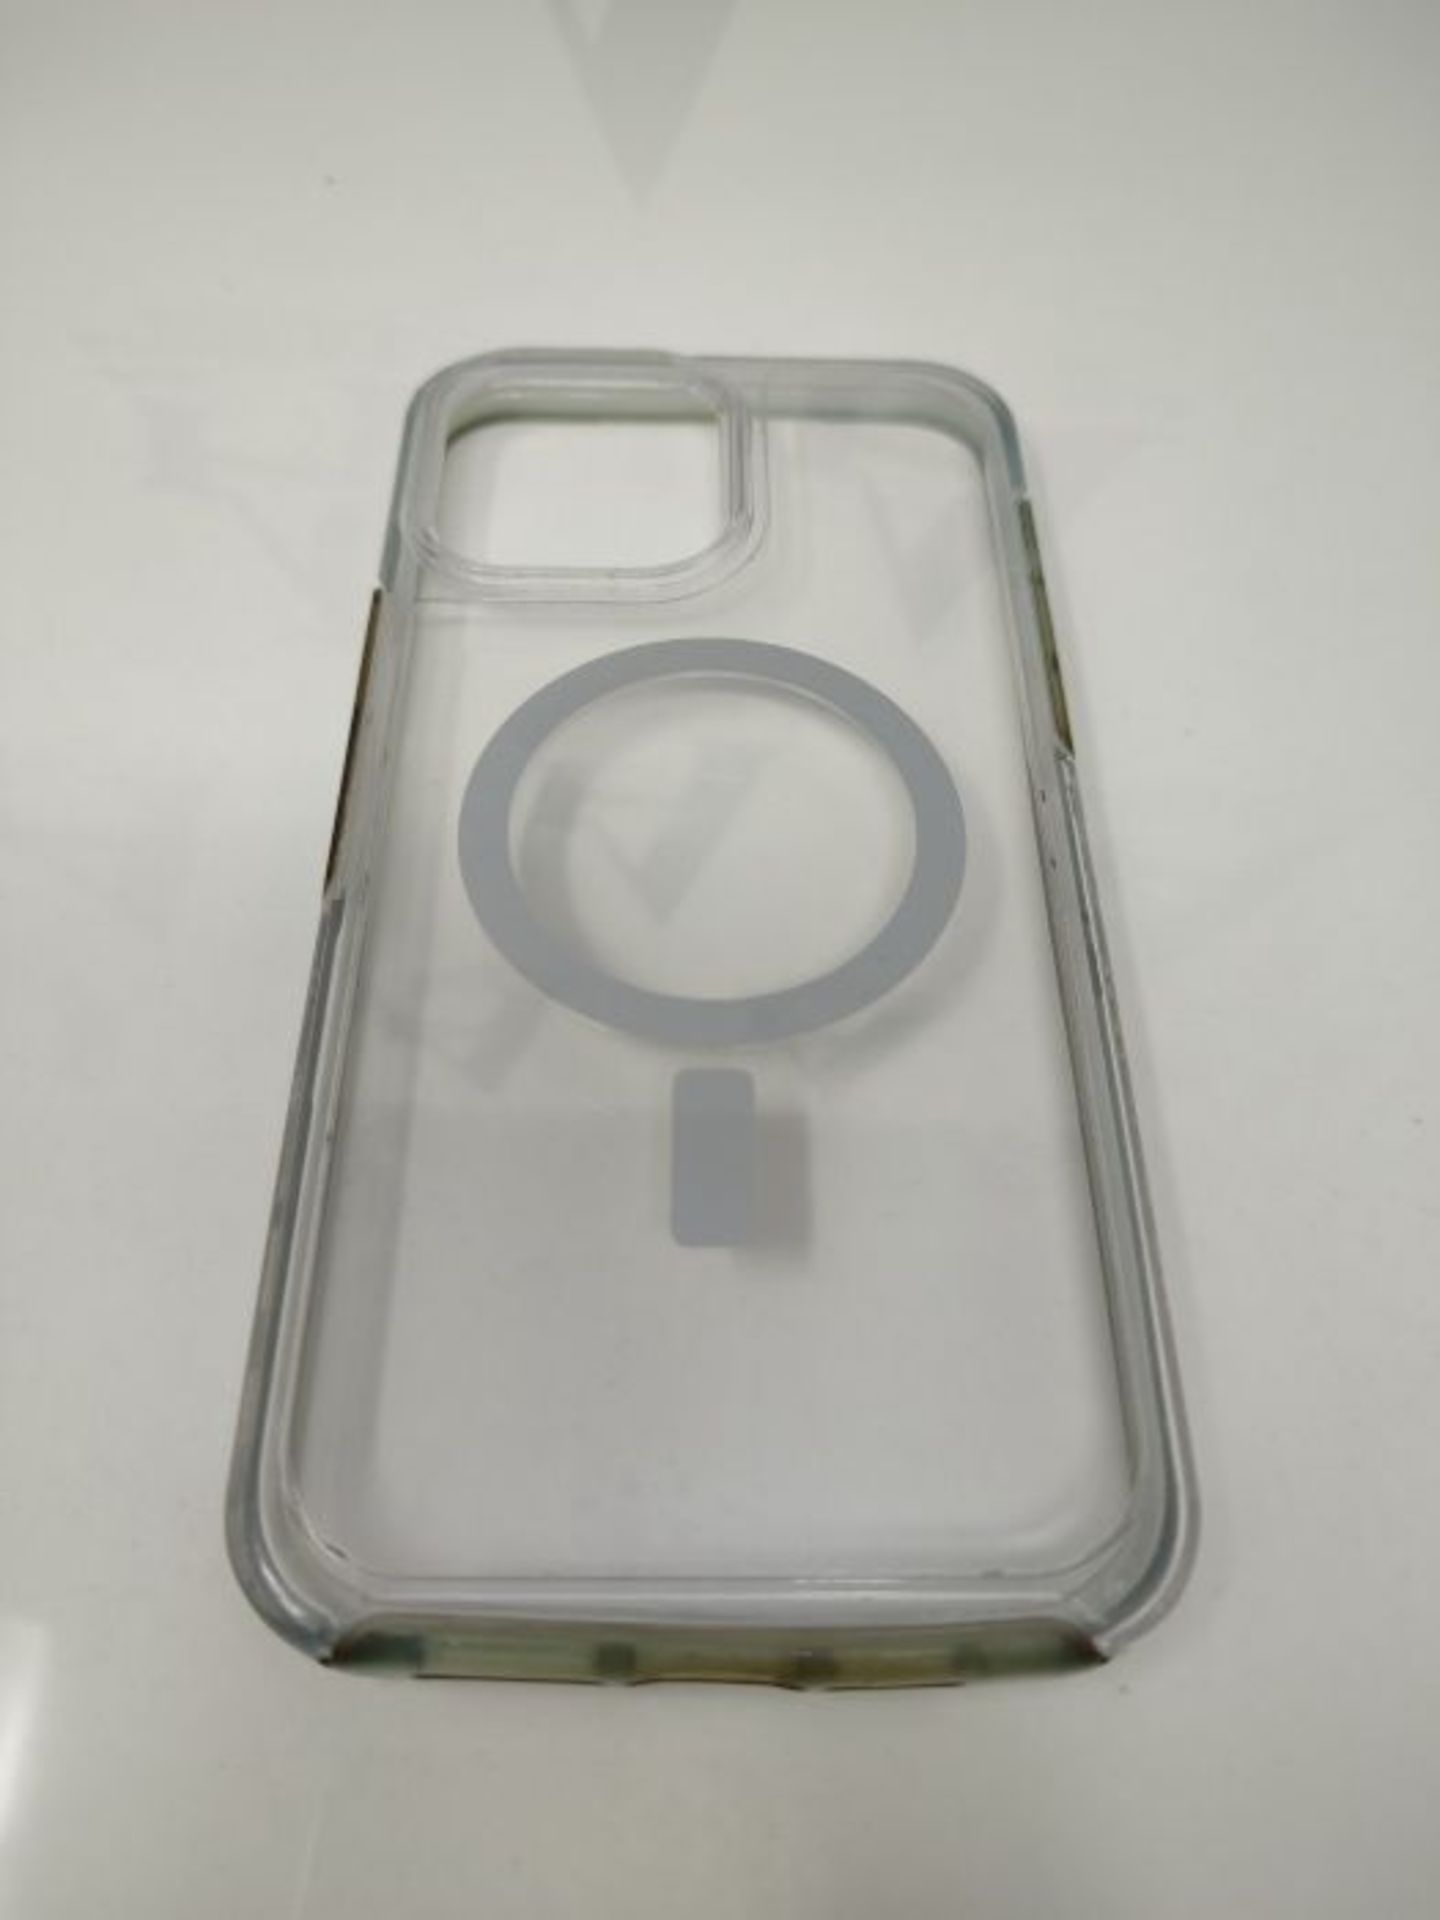 OtterBox Symmetry+ Clear Case for iPhone 13 Pro Max / iPhone 12 Pro Max for MagSafe, S - Image 6 of 6